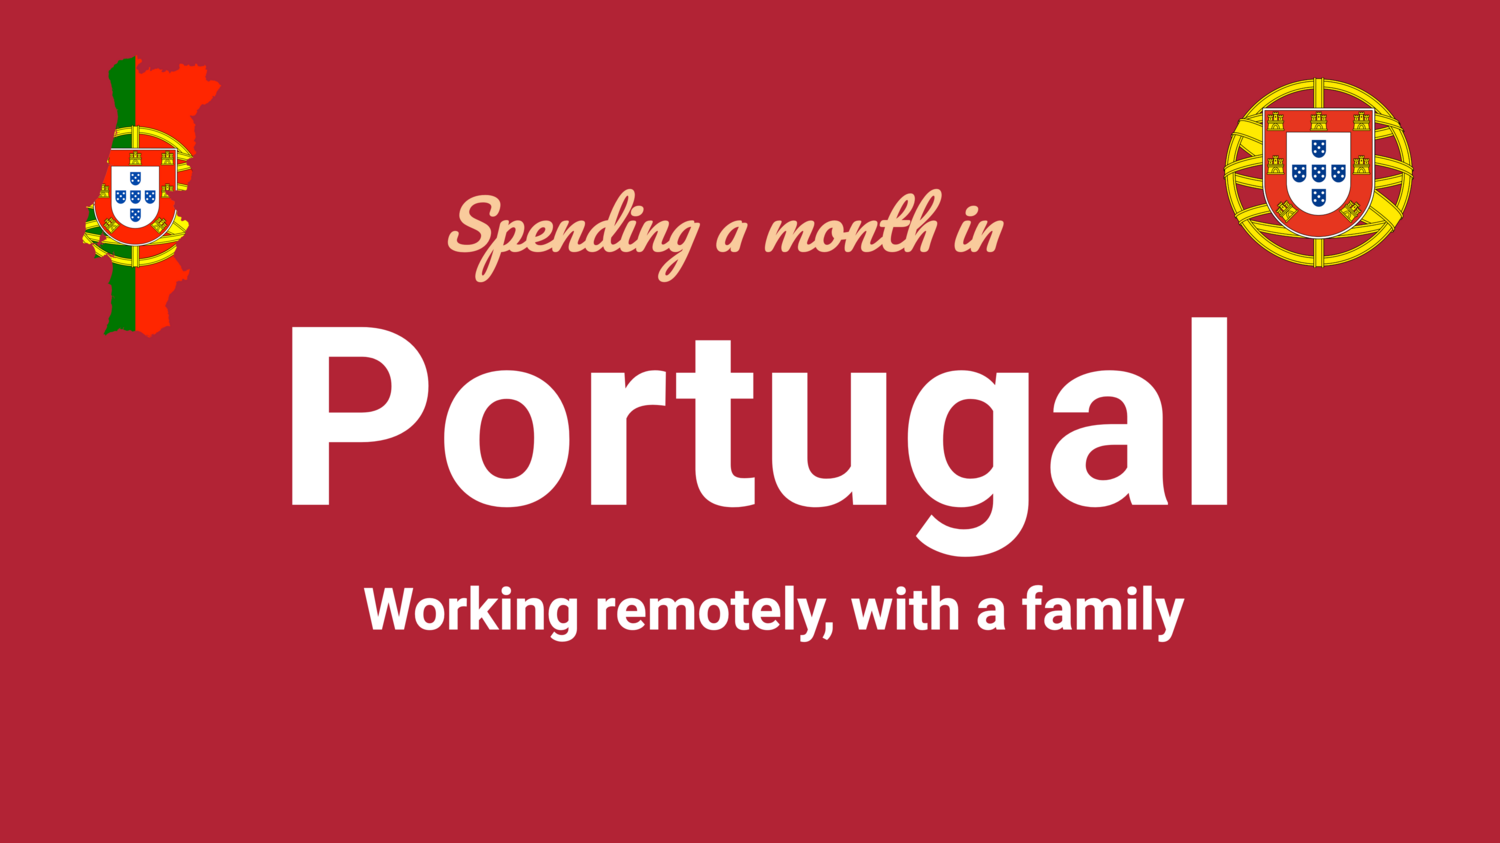 [Spending a month in Portugal](/posts/spending-a-month-in-portugal/): Details on our aforementioned experience in Portugal.